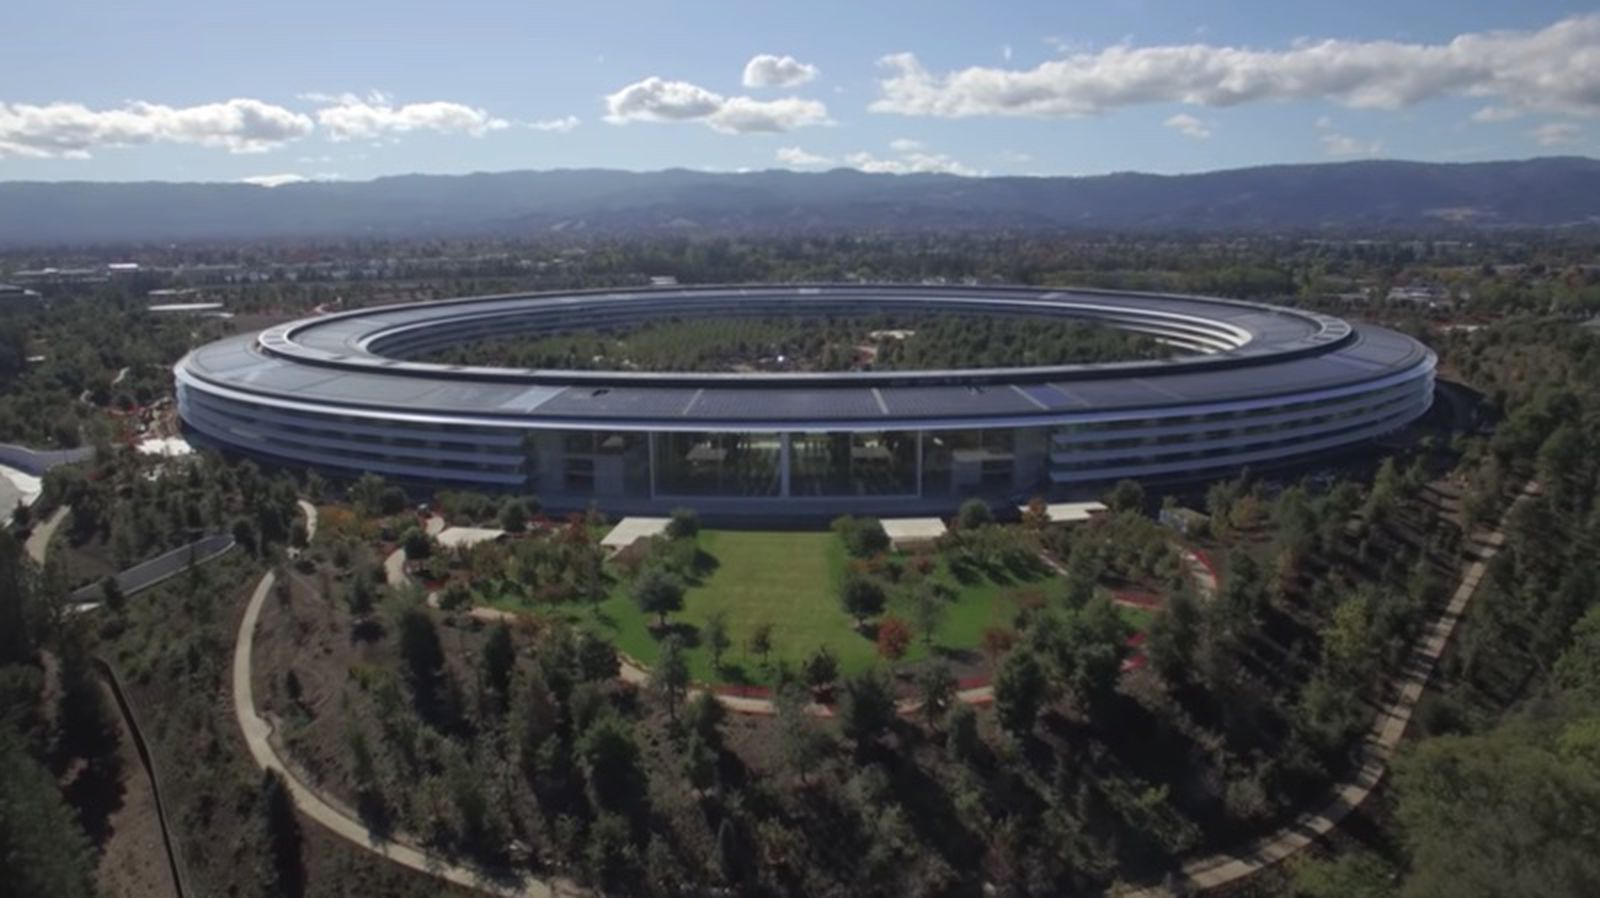 French News Channel Gets Rare Access Into Apple Park, 'One of the Most Secret Pl..